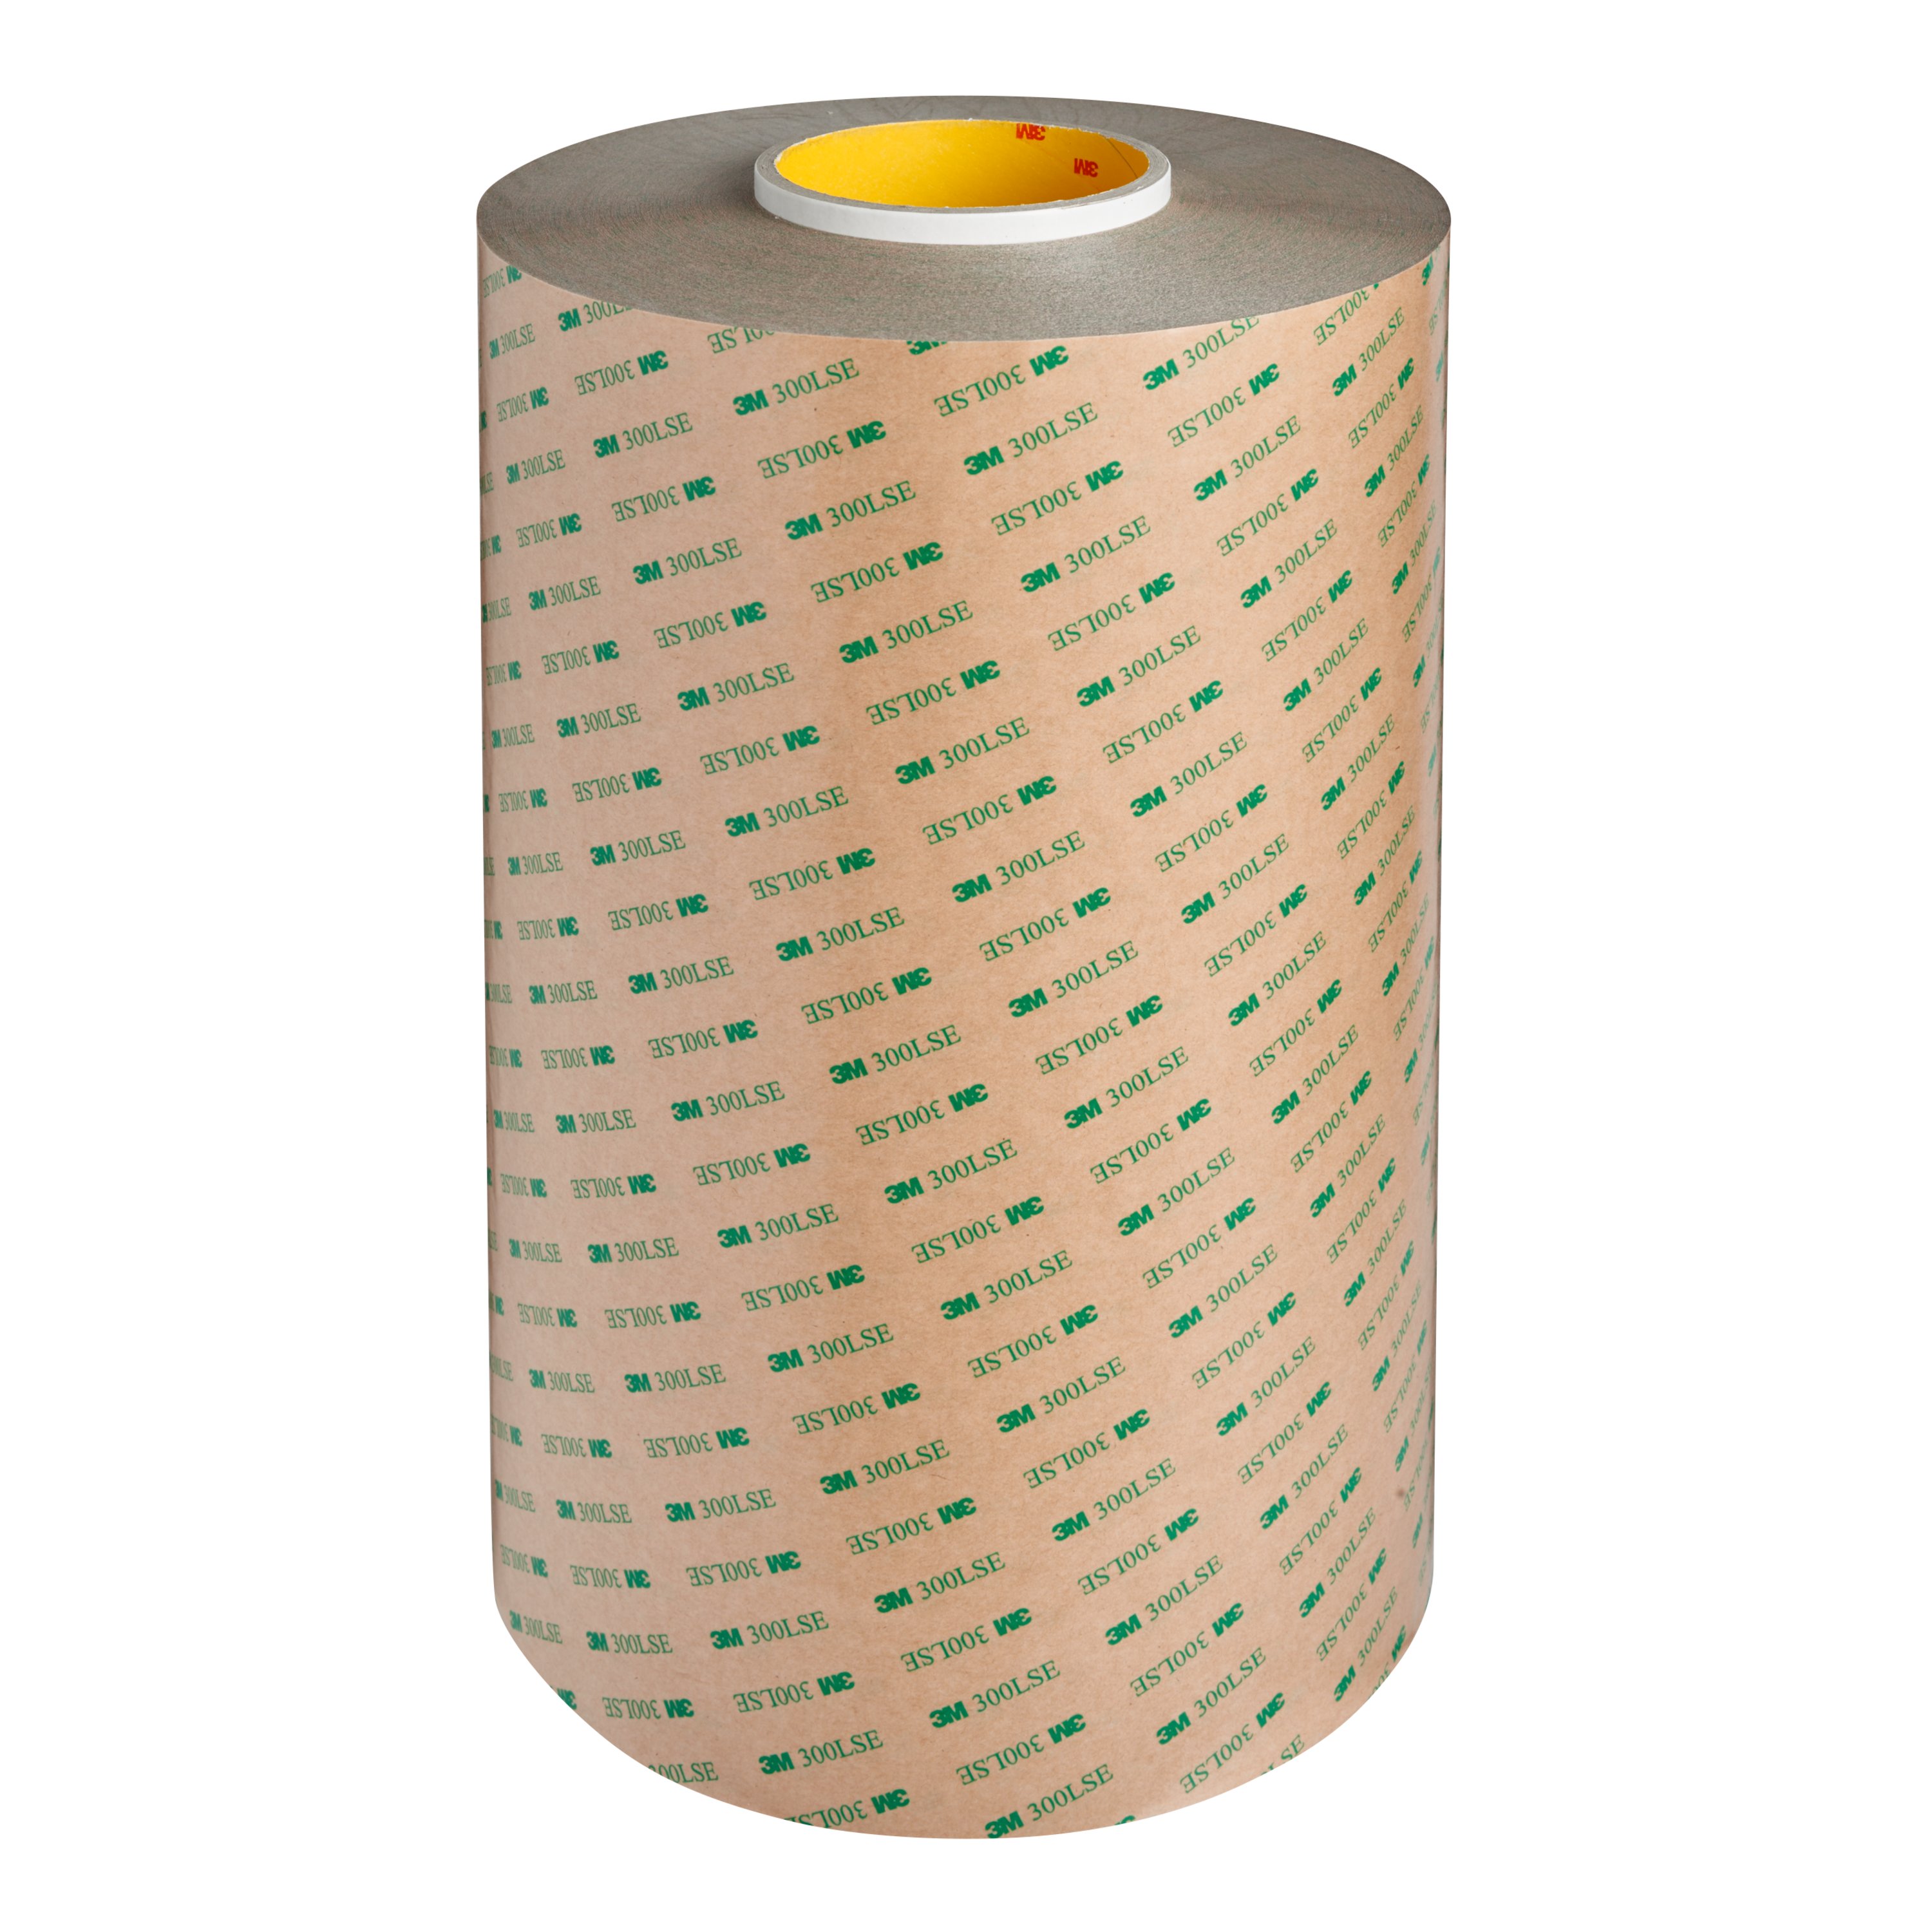 3M™ Adhesive Transfer Tape 9471LE offers good chemical, humidity and moisture resistance, as well as performance across a wide temperature range